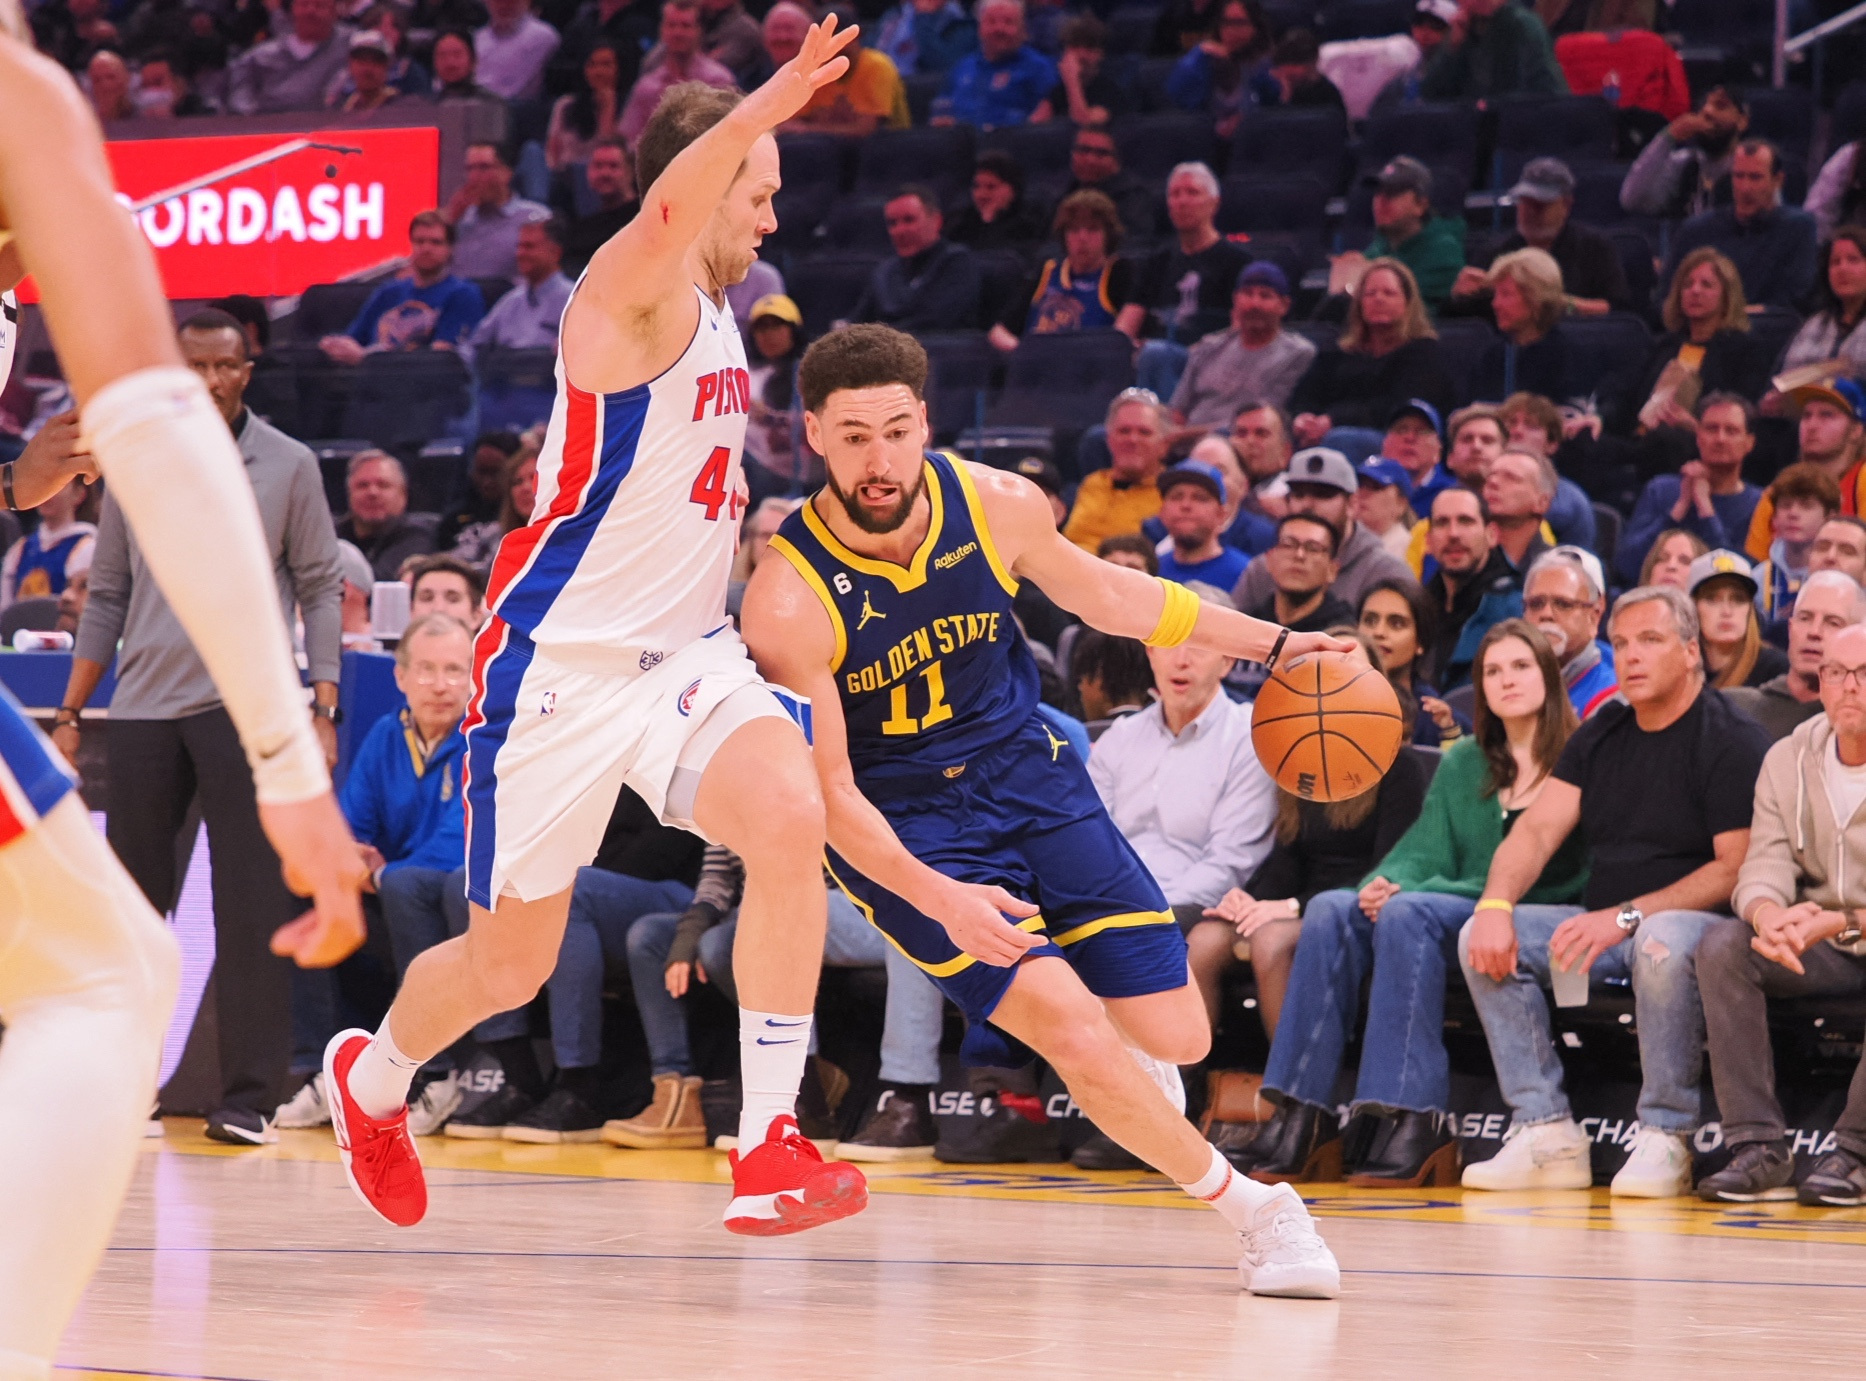 Jan 4, 2023; San Francisco, California, USA; Golden State Warriors guard Klay Thompson (11) drives in against Detroit Pistons small forward Bojan Bogdanovic (44) during the first quarter at Chase Center. Mandatory Credit: Kelley L Cox-USA TODAY Sports Photo: Kelley L Cox/REUTERS